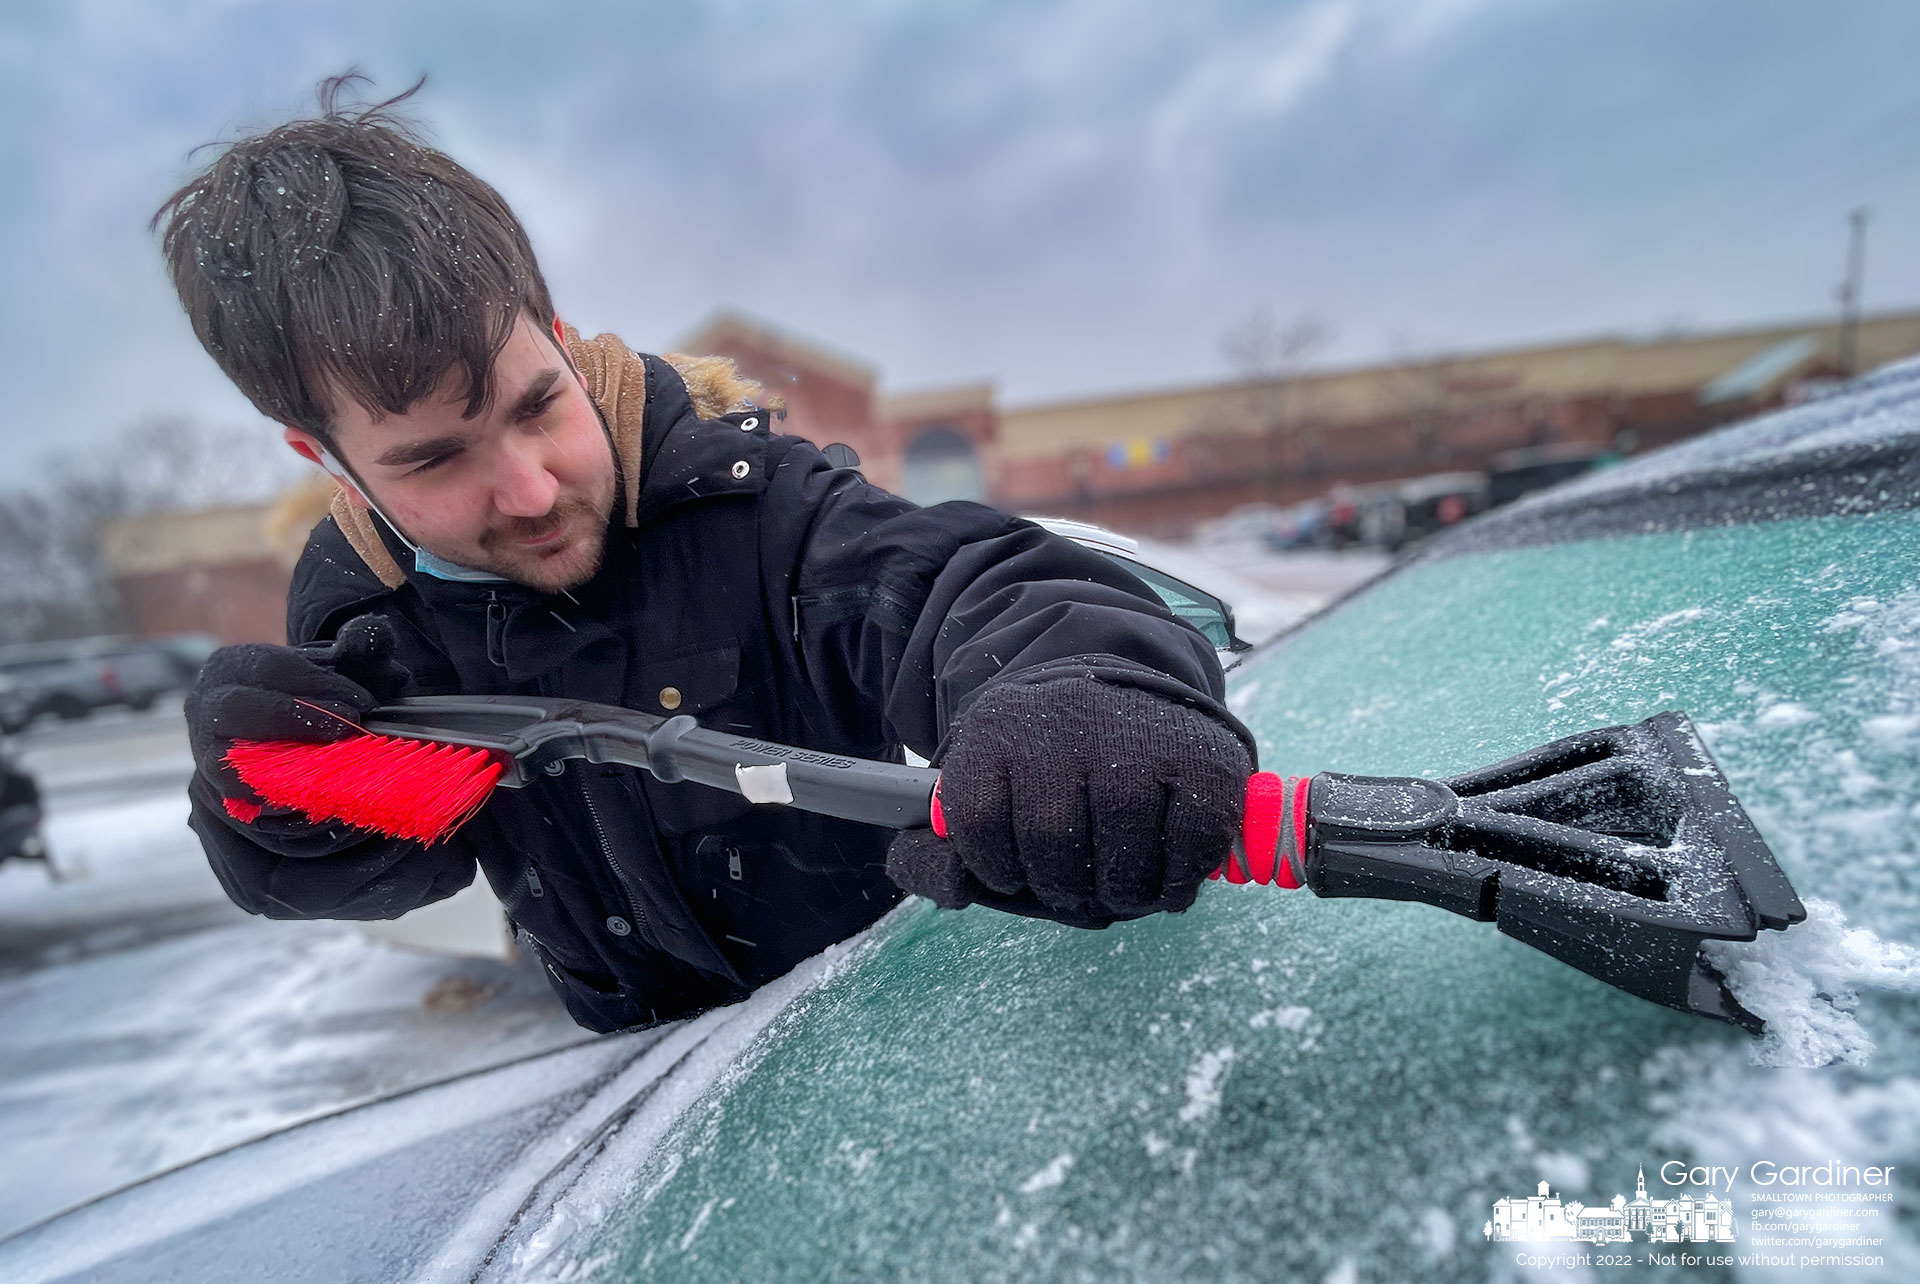 A man struggles to scrape away a layer of ice that collected on his car while he worked the early morning shift. My Final Photo for Feb. 3, 2022.